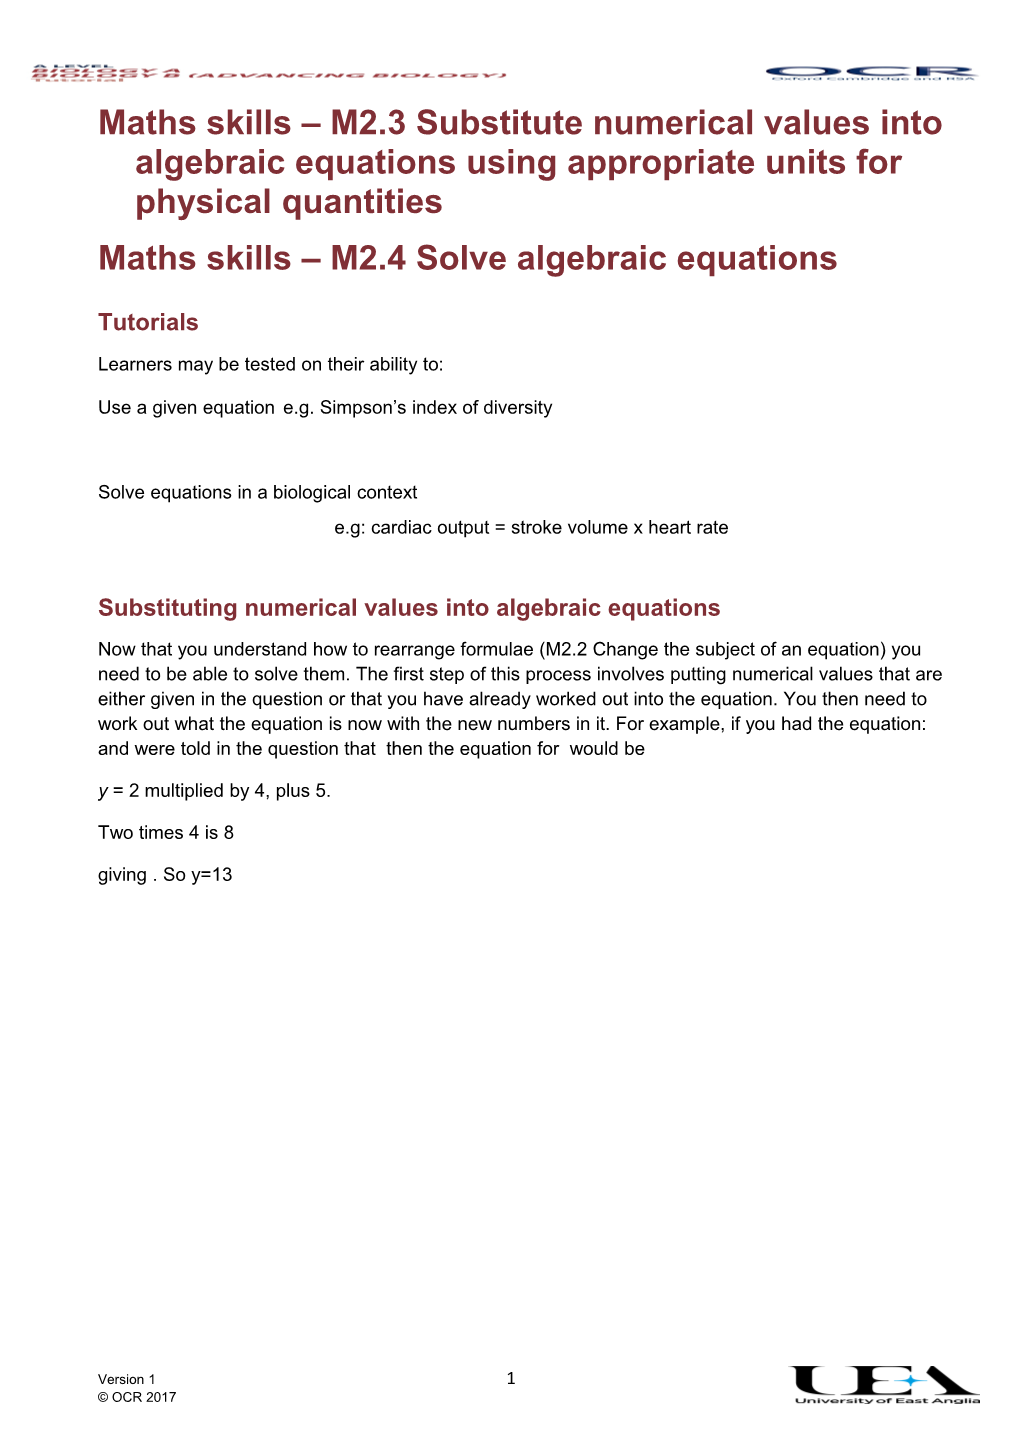 Maths in Biology M2.3 Substituting Numerical Values Into Algebraic Equations Using Appropriate